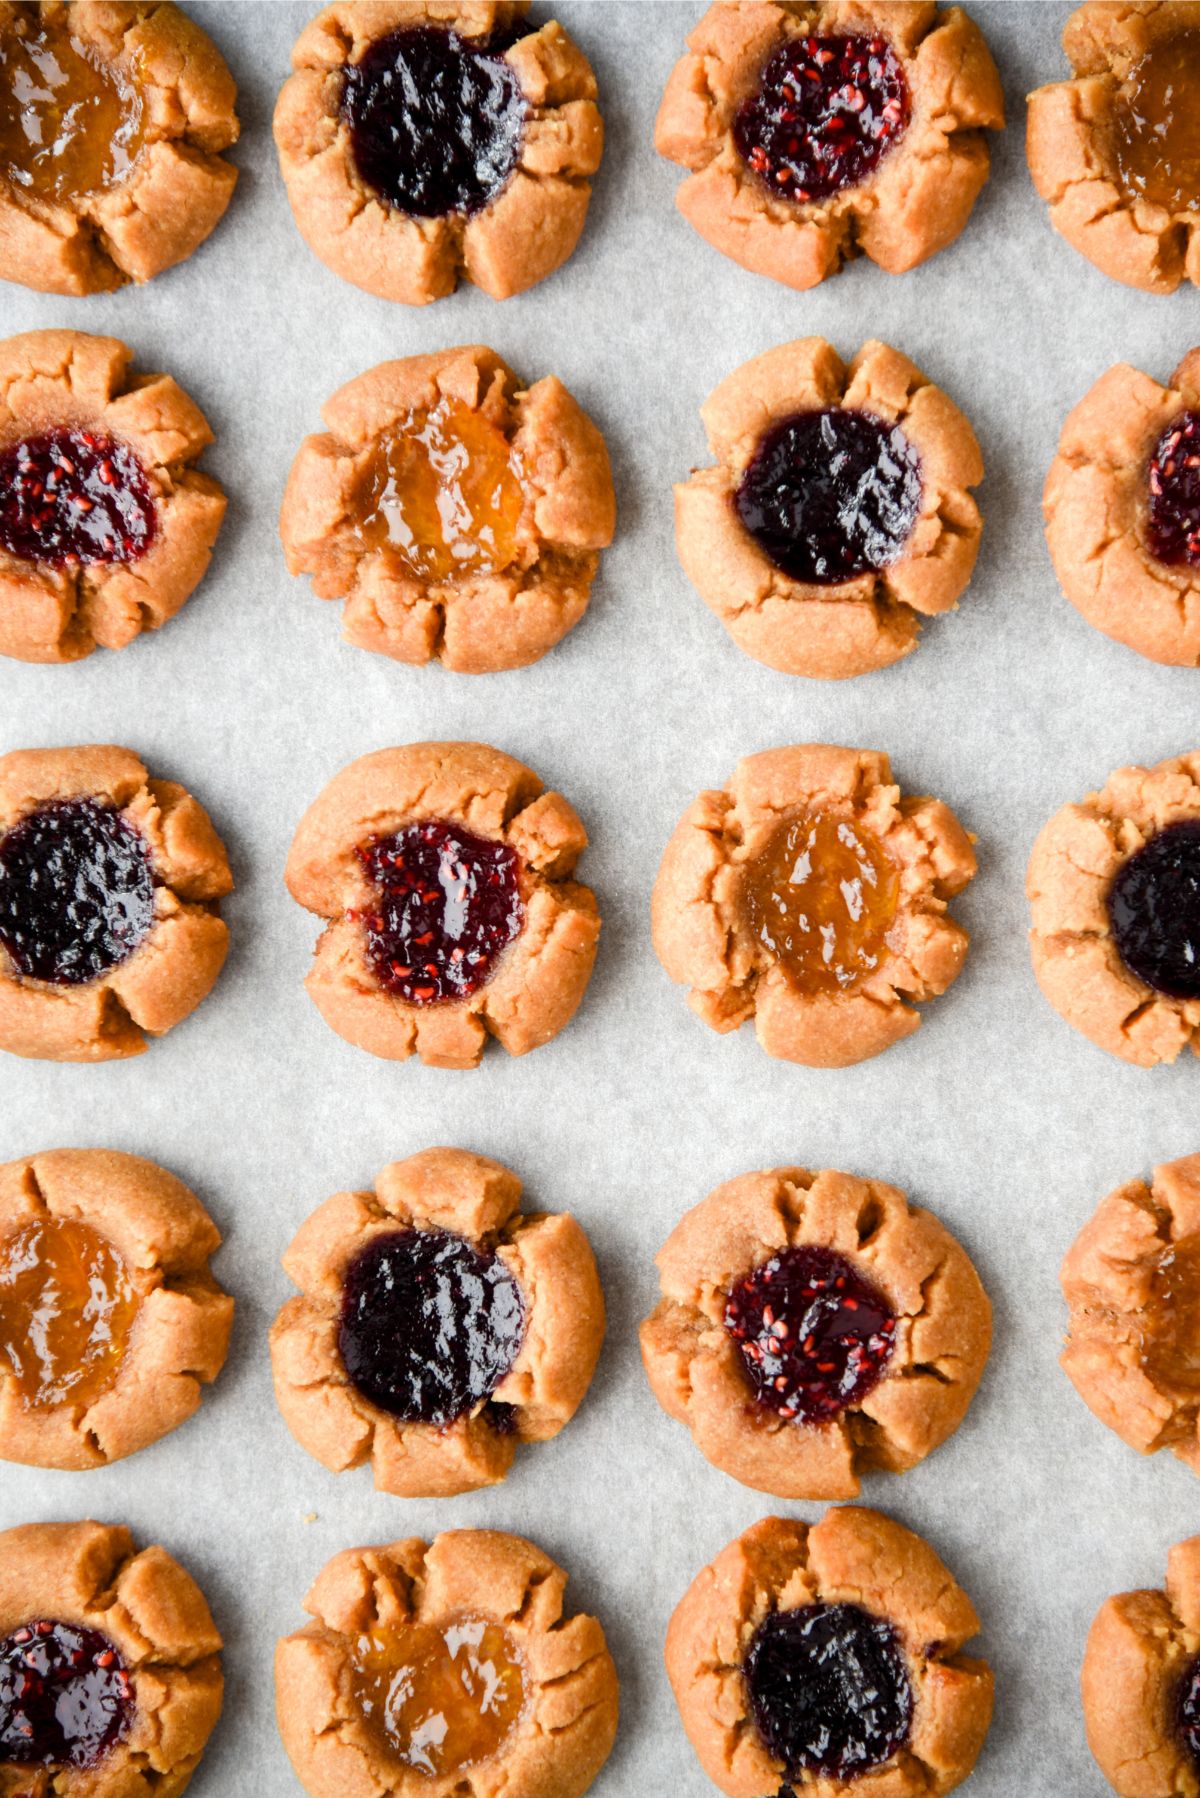 5 Ingredient Peanut Butter and Jam Thumbprint Cookies lined up on parchment paper